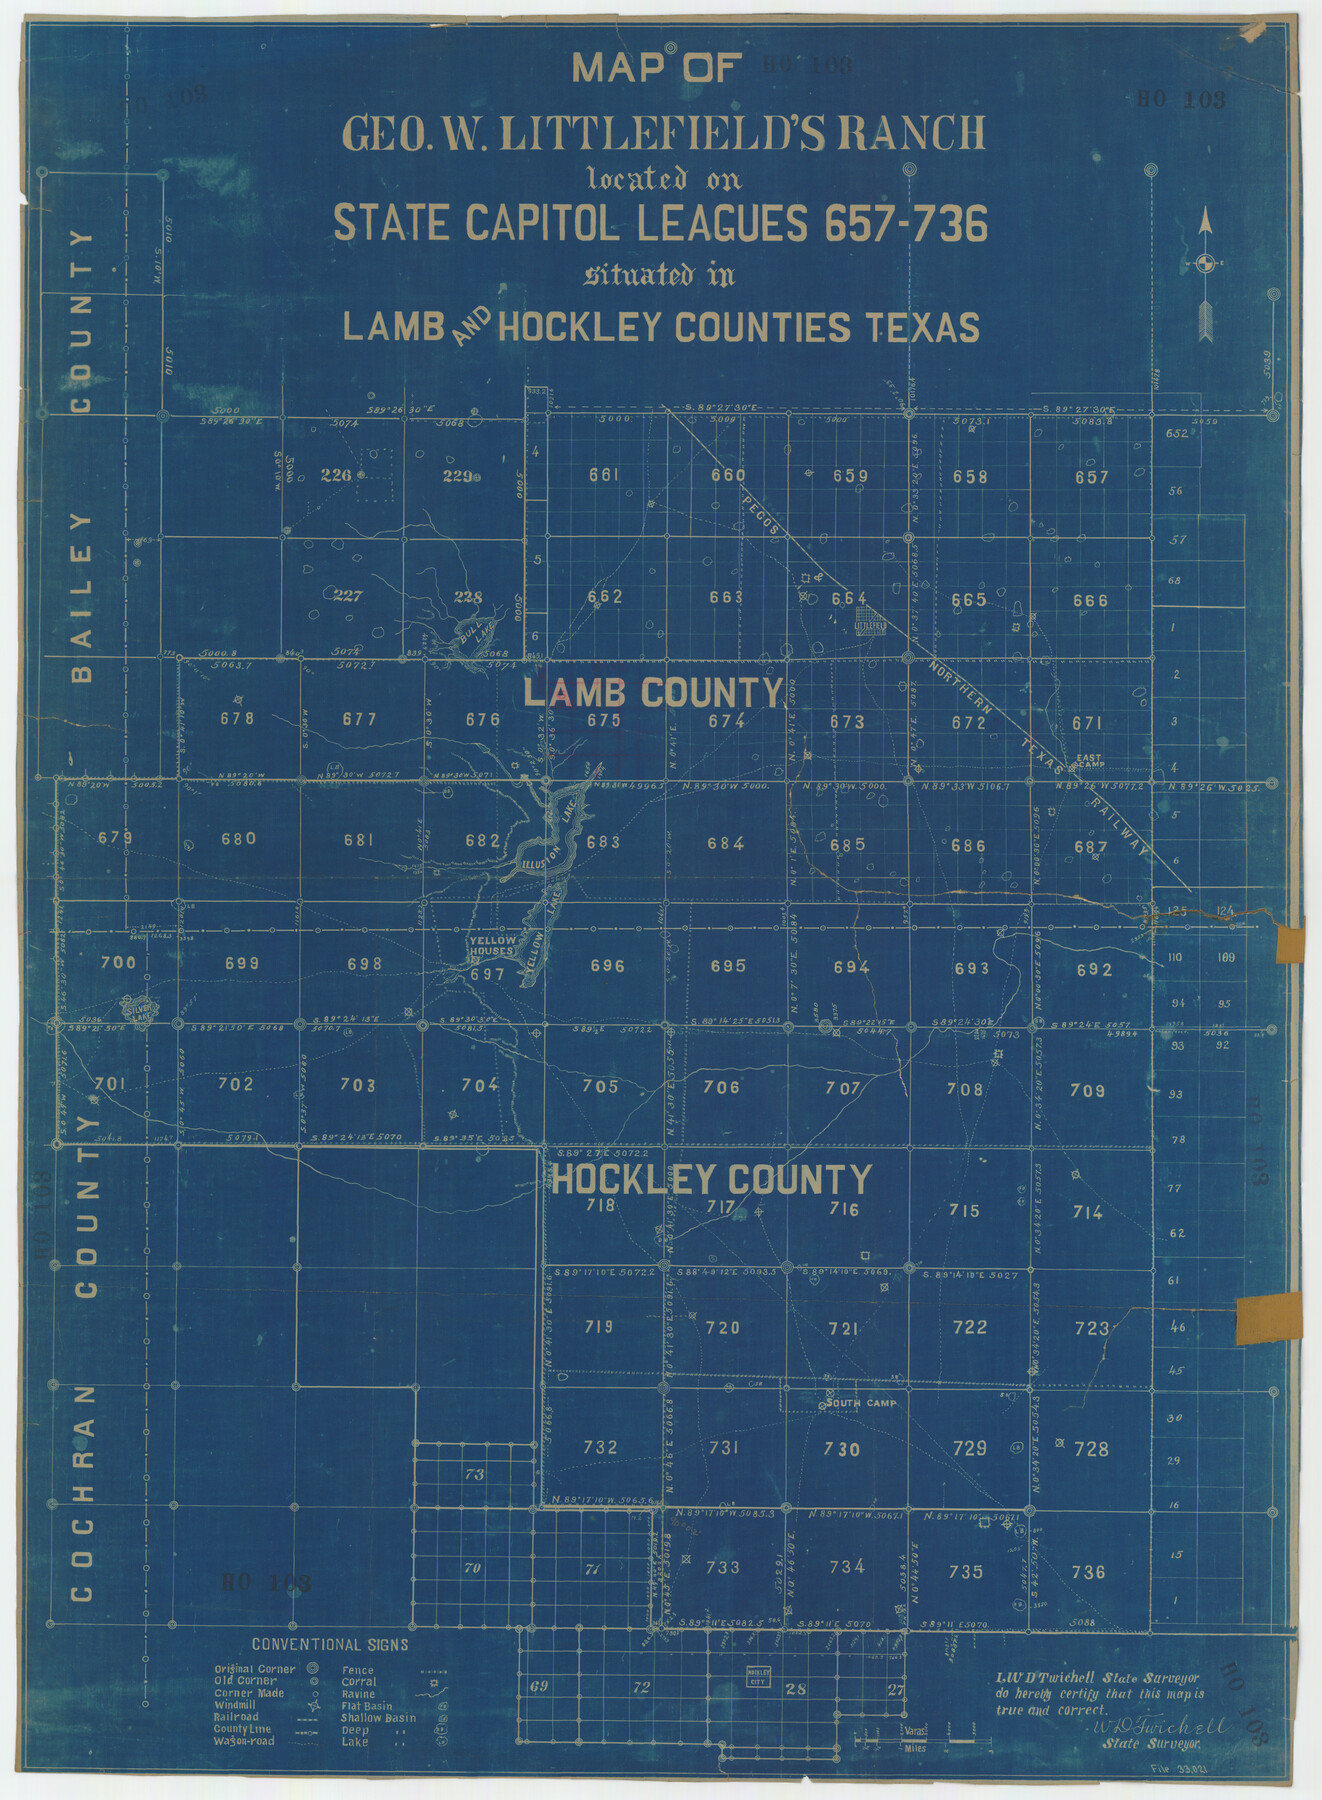 92262, Map of George W. Littlefield's Ranch Located on State Capitol Leagues 657-736 Situated in Lamb and Hockley Counties, Texas, Twichell Survey Records